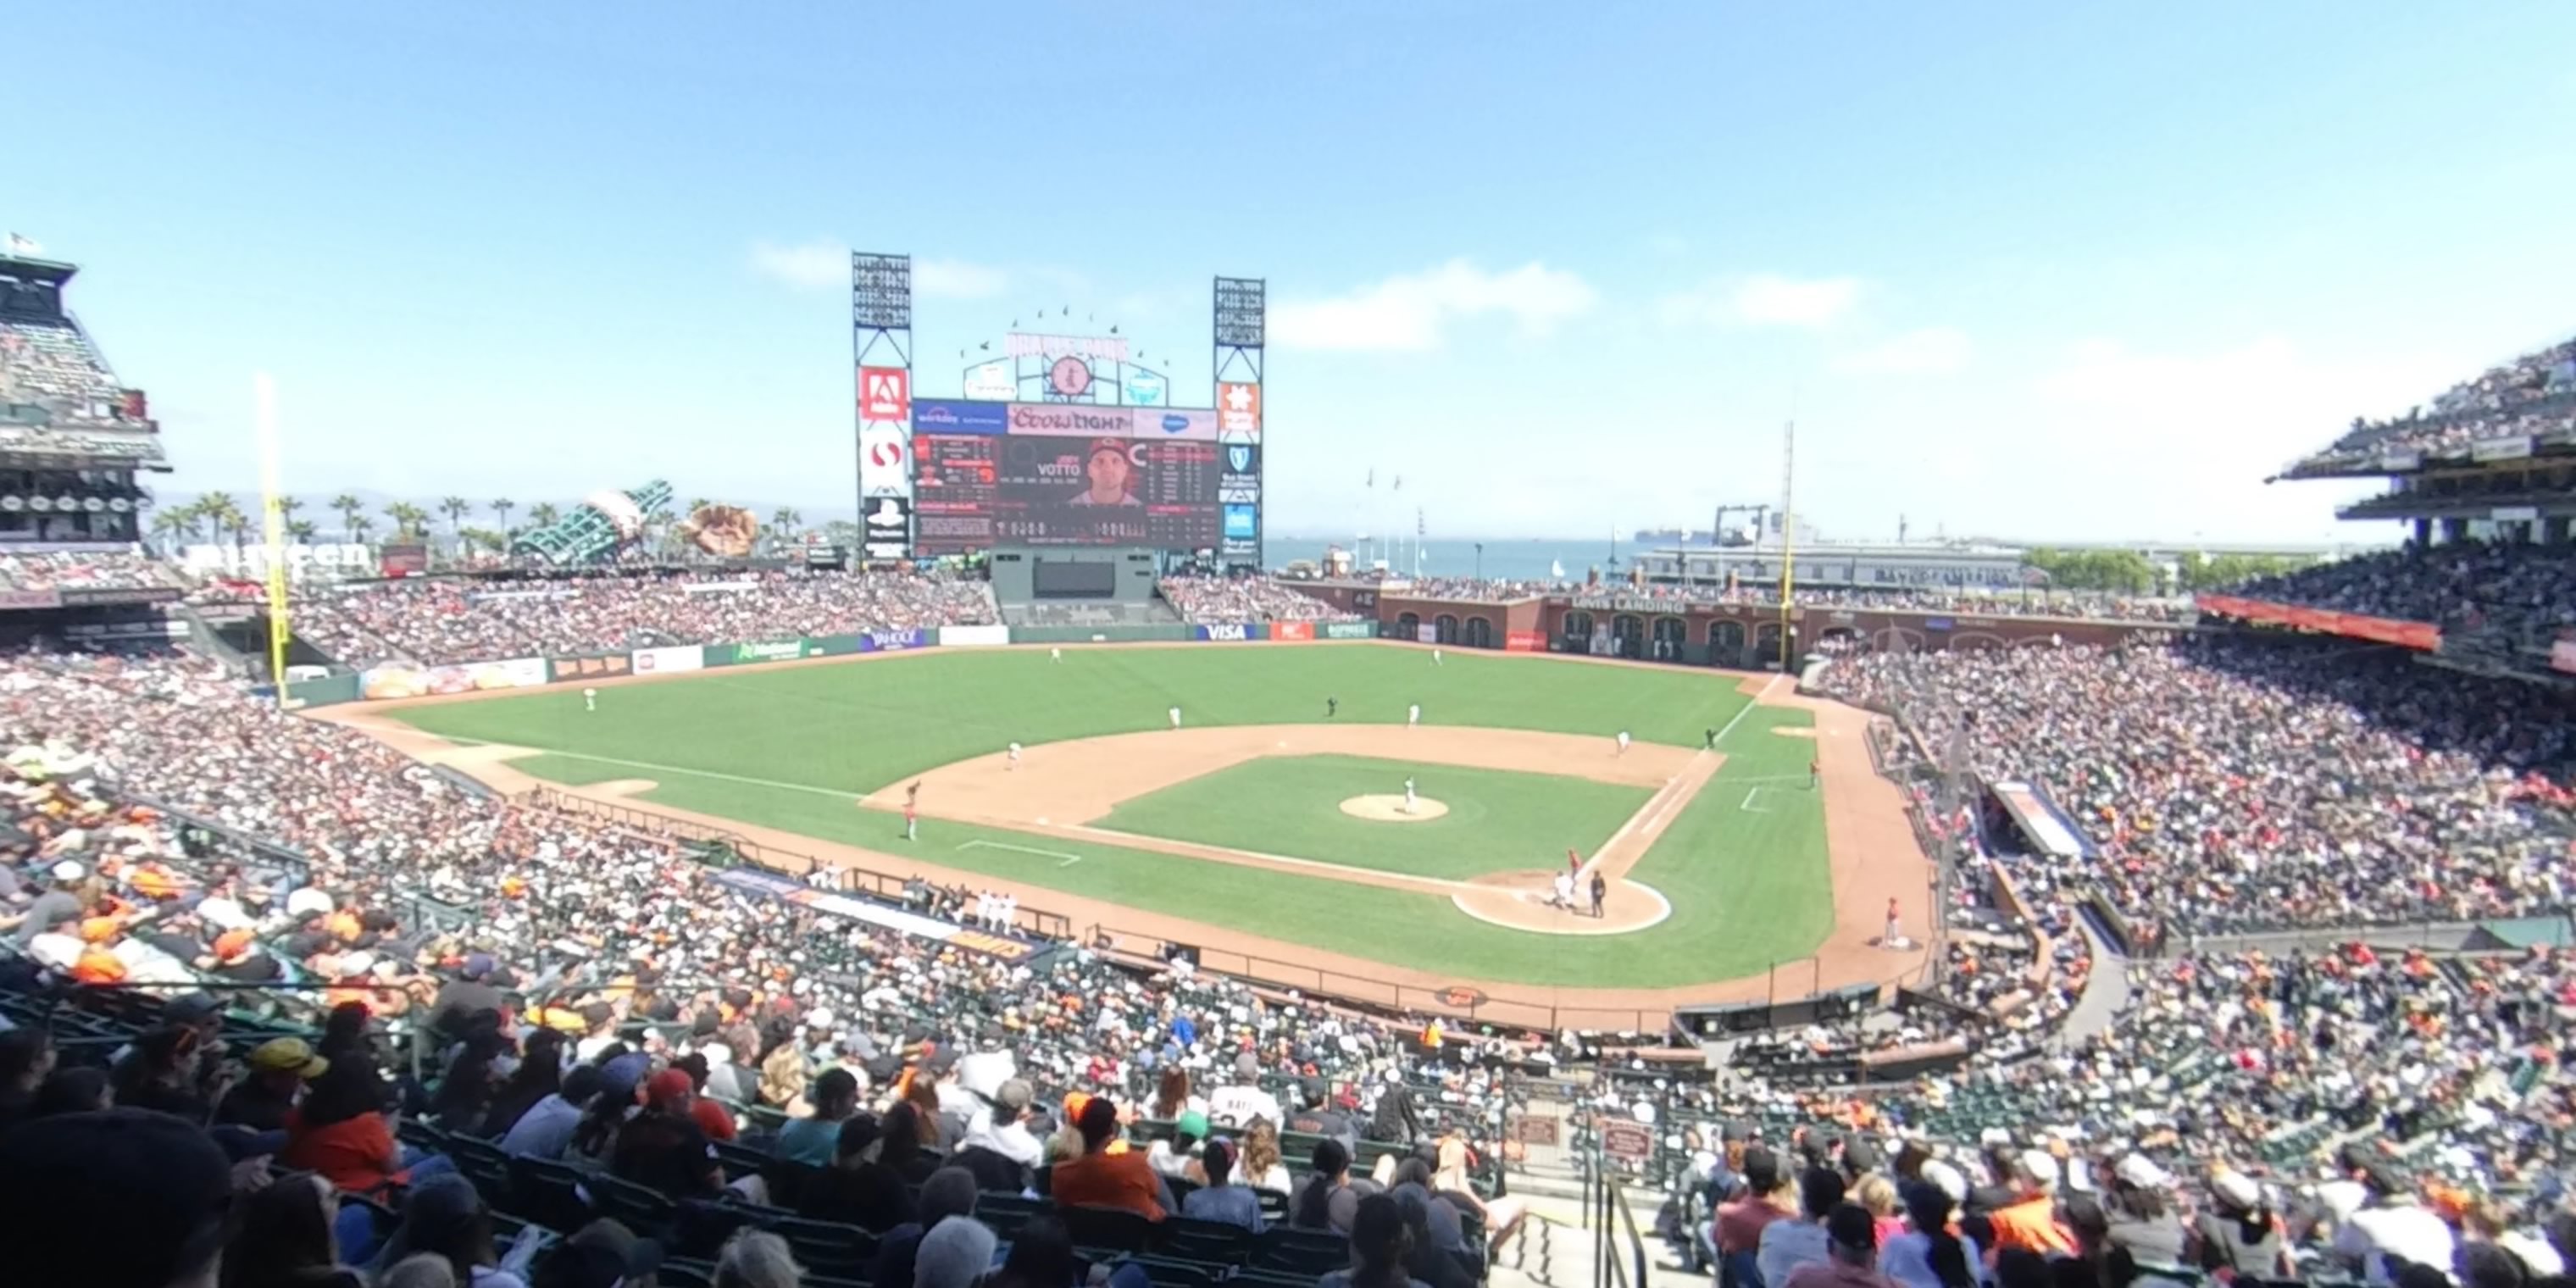 section 218 panoramic seat view  for baseball - oracle park